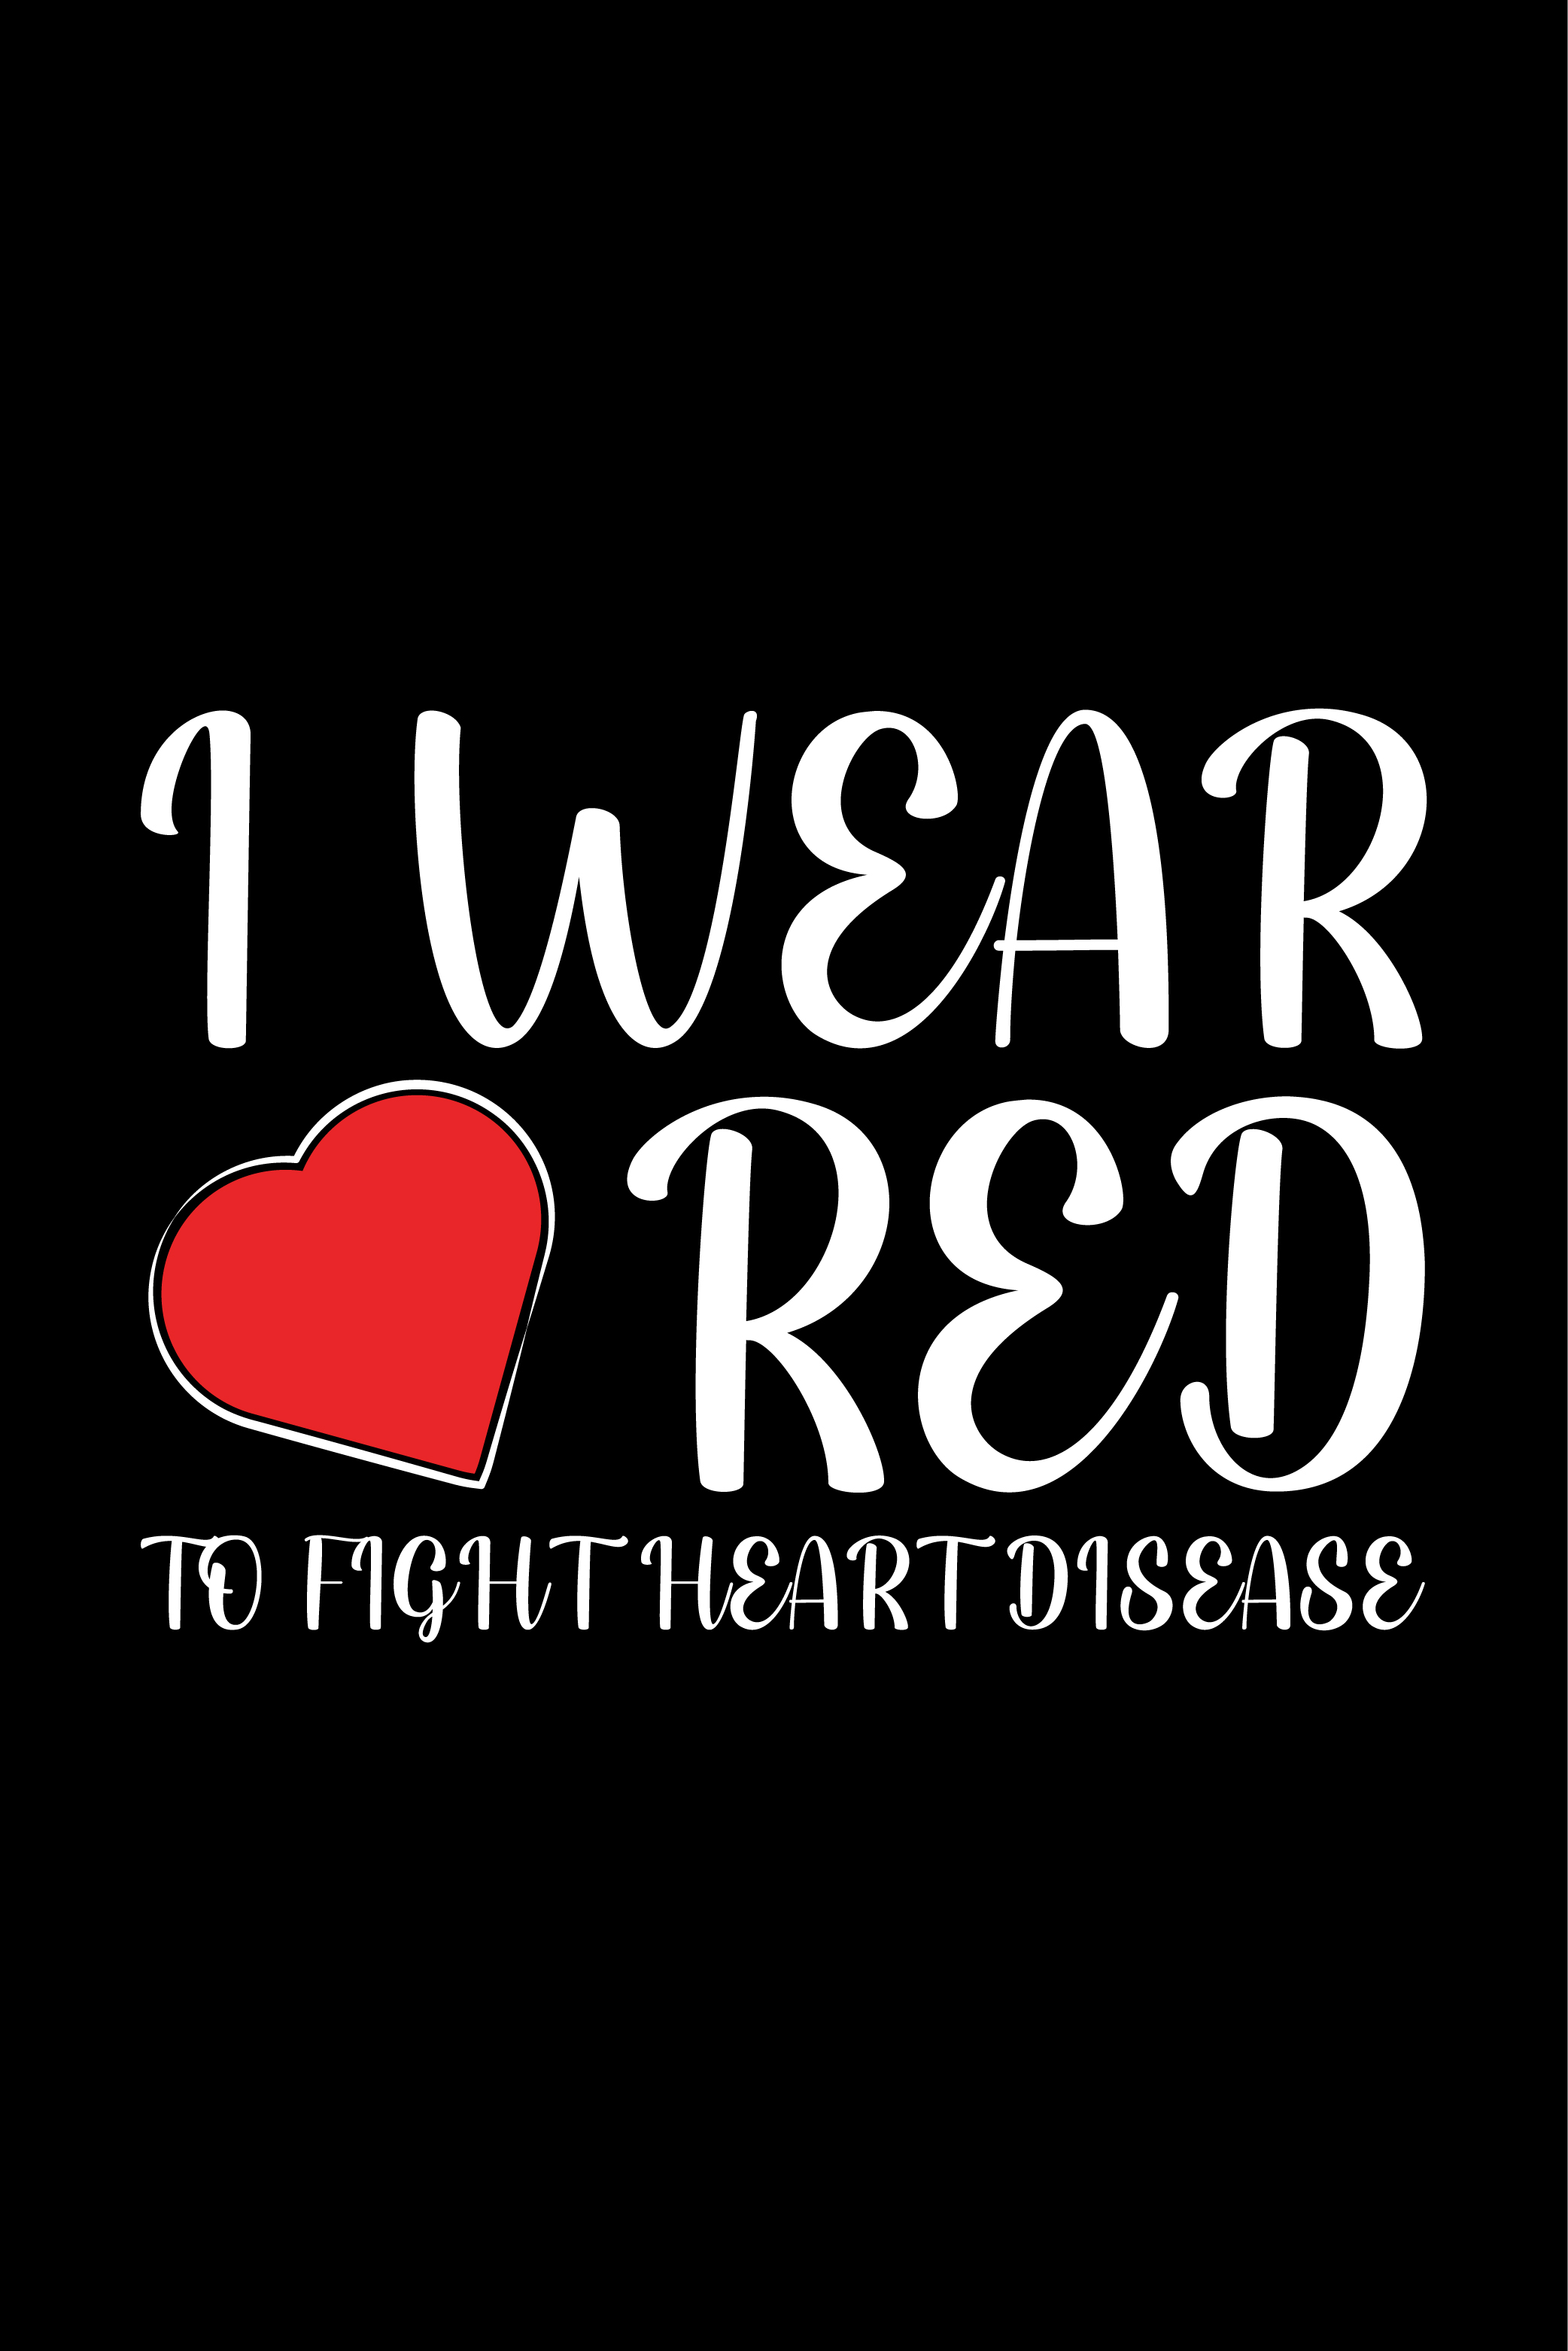 I Wear Red To Fight Heart Disease illustrations for print-ready T-Shirts design pinterest preview image.